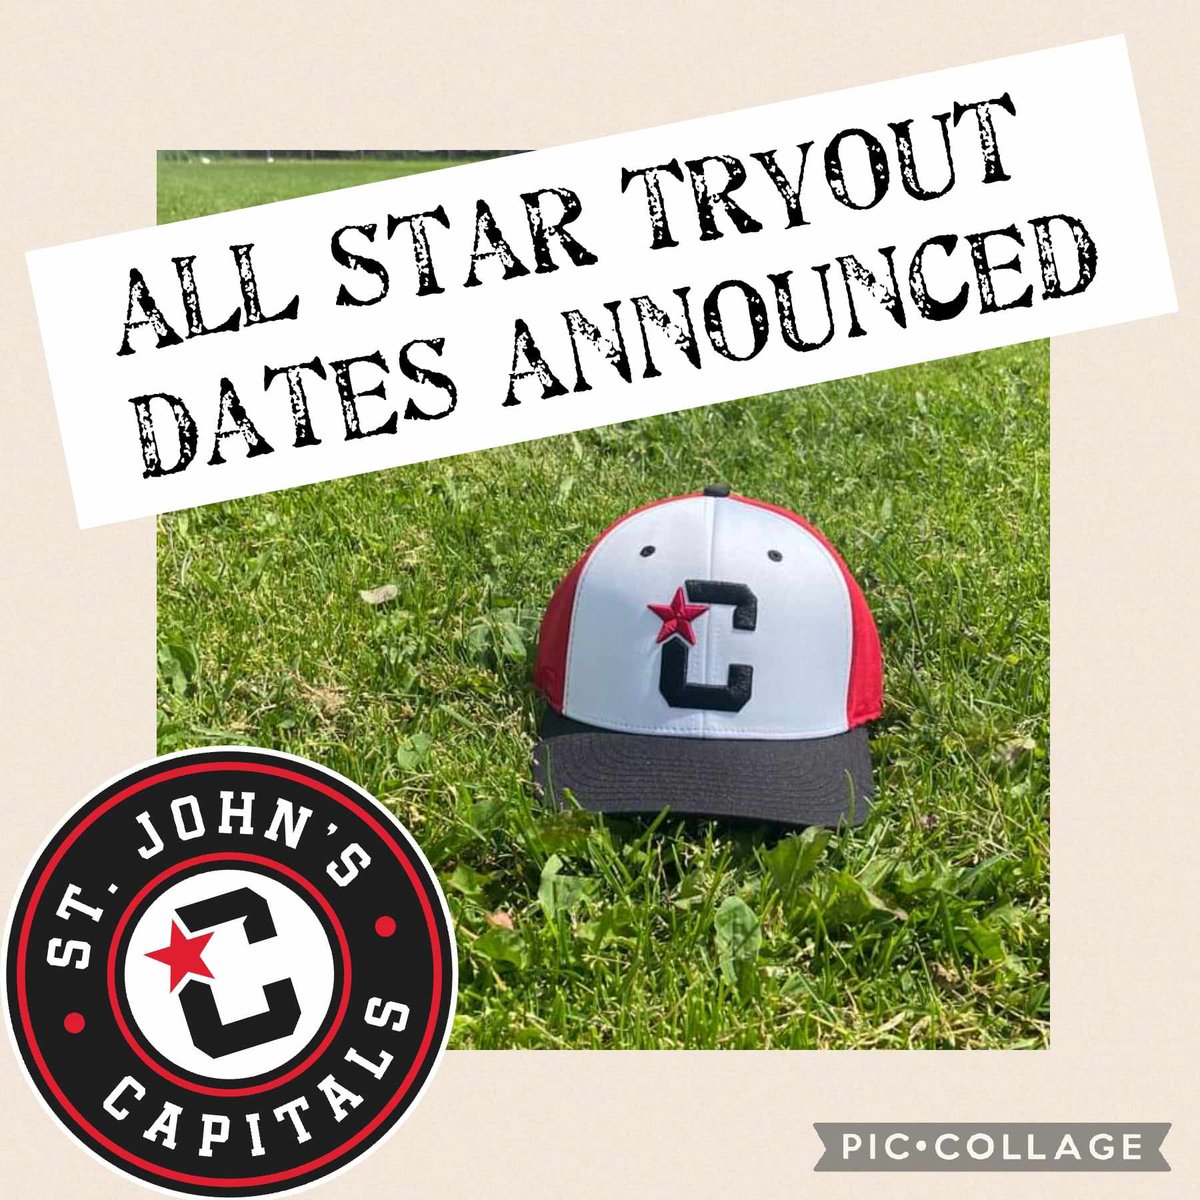 All Star Tryout dates have been posted. Visit baseballstjohns.ca for more information